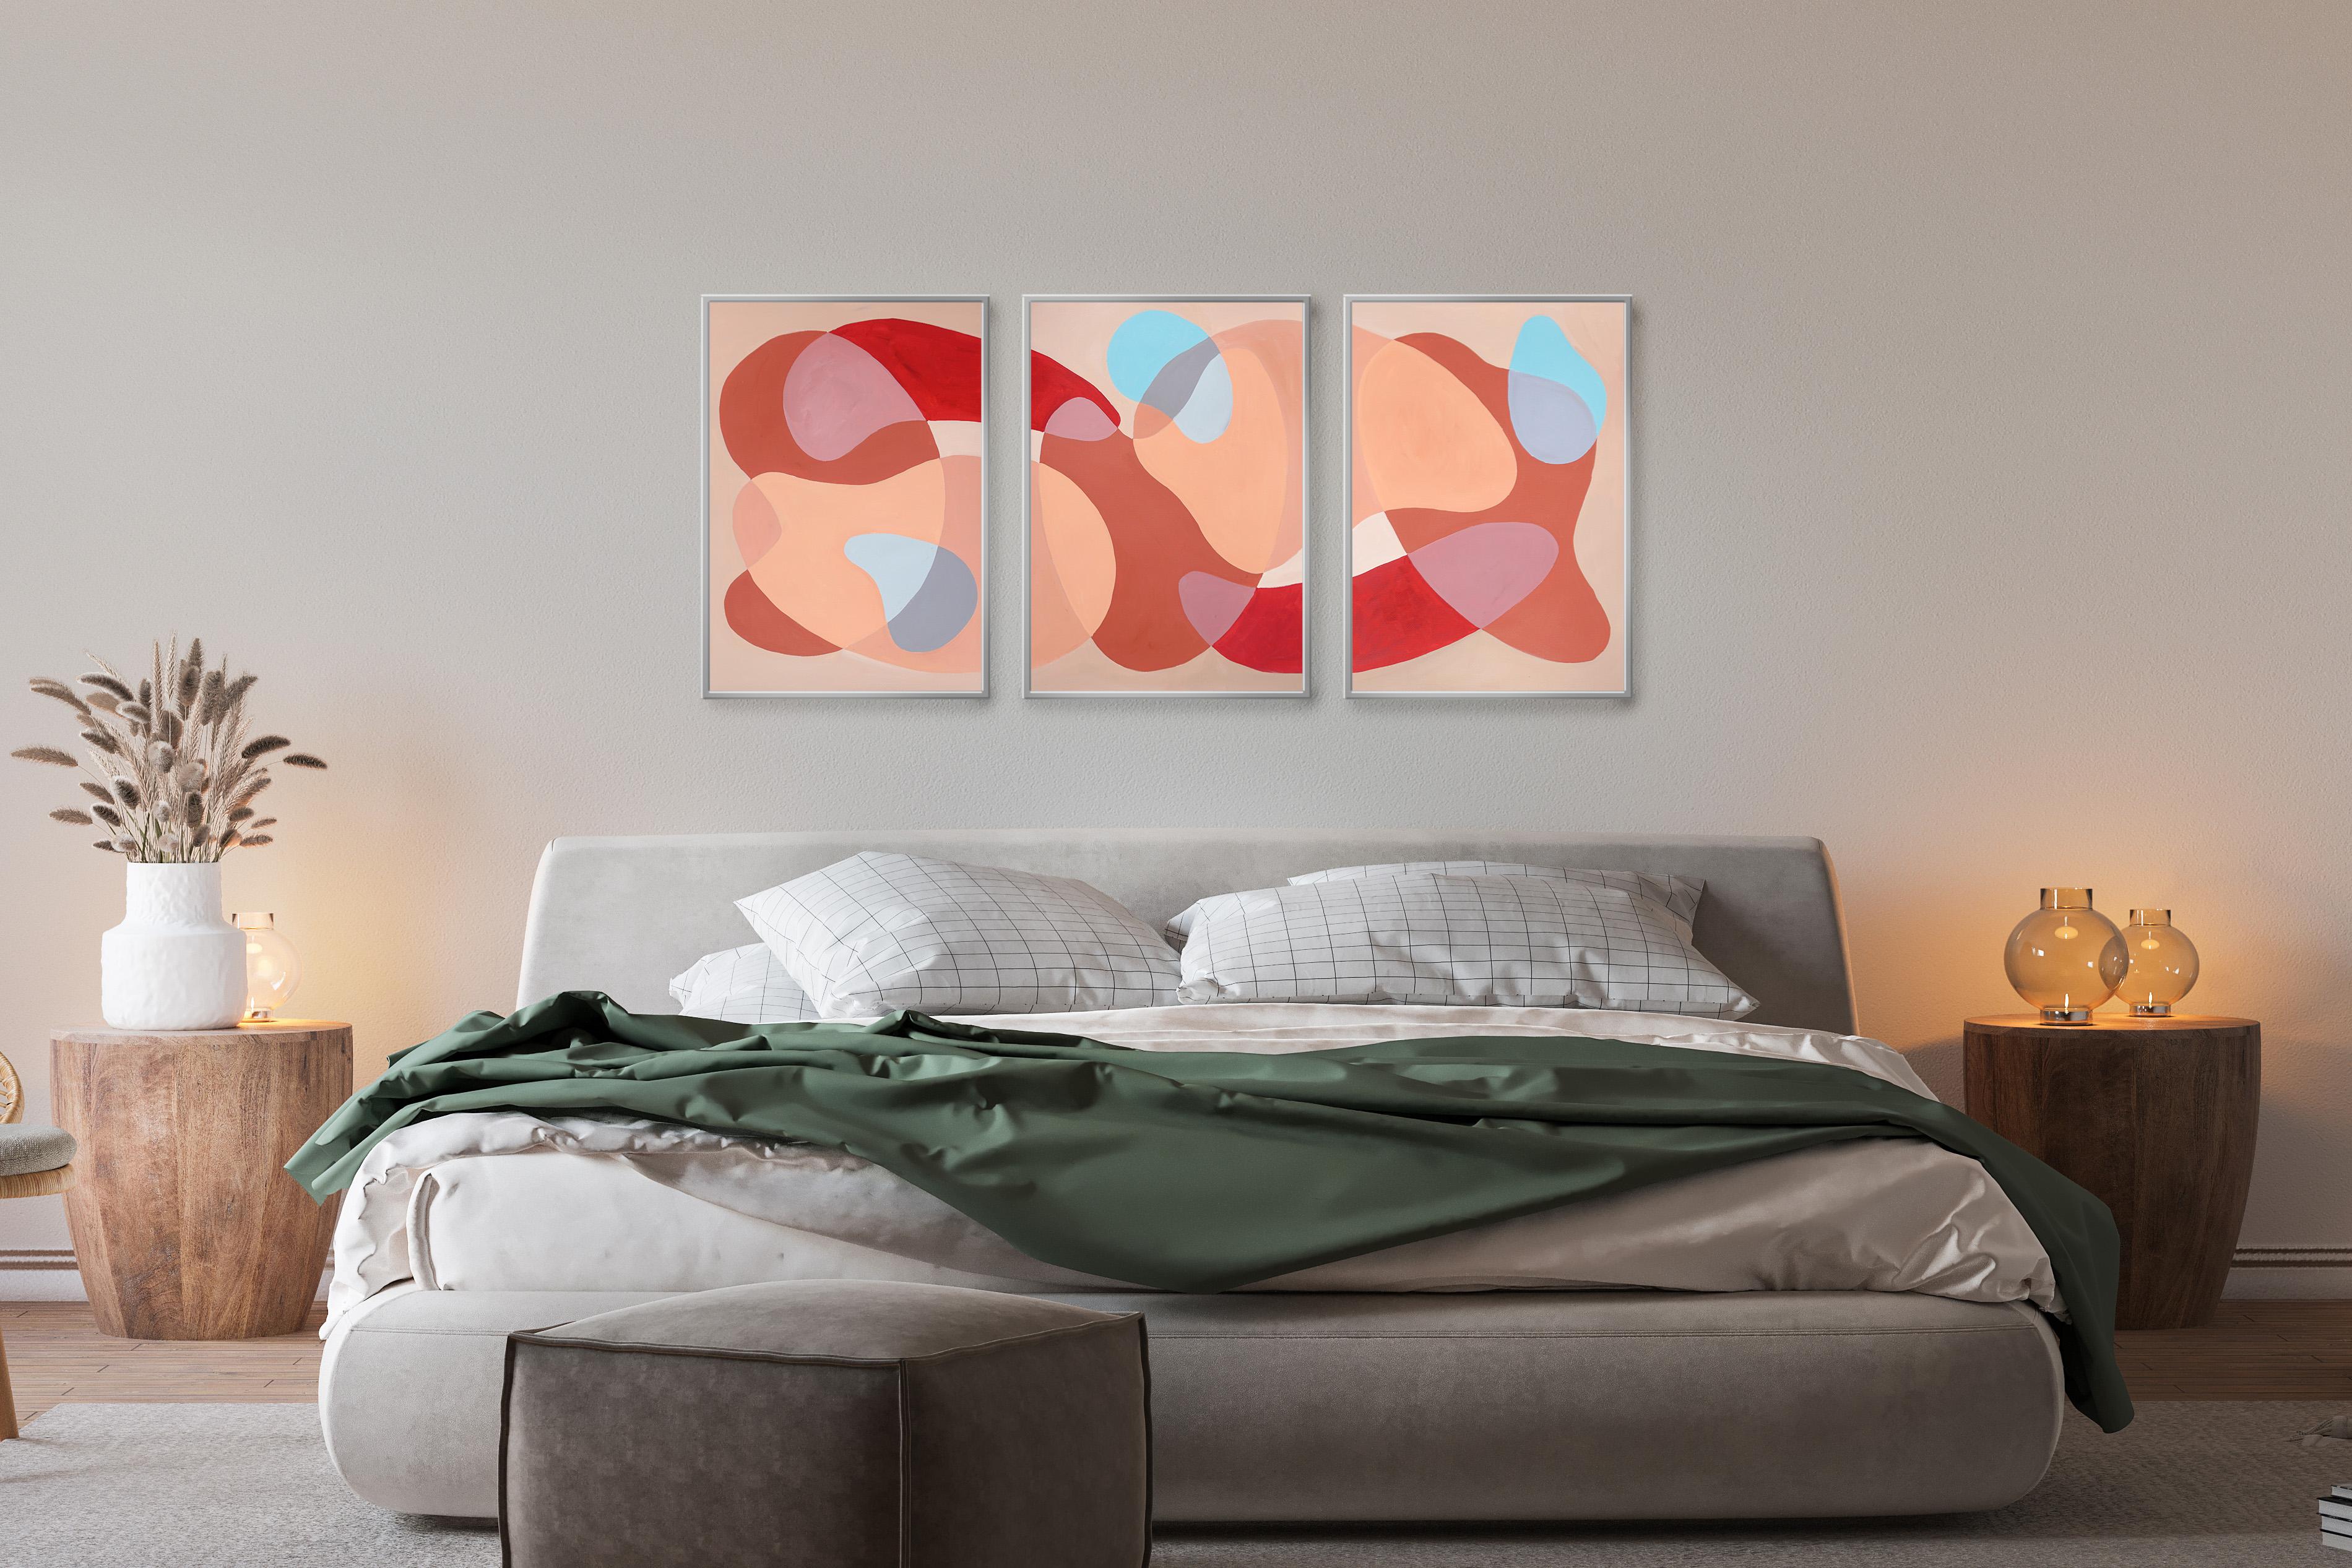 Mid-Century Modern Abstract Shapes Triptych, Sleeping Bodies, Brown Earth Tones 5